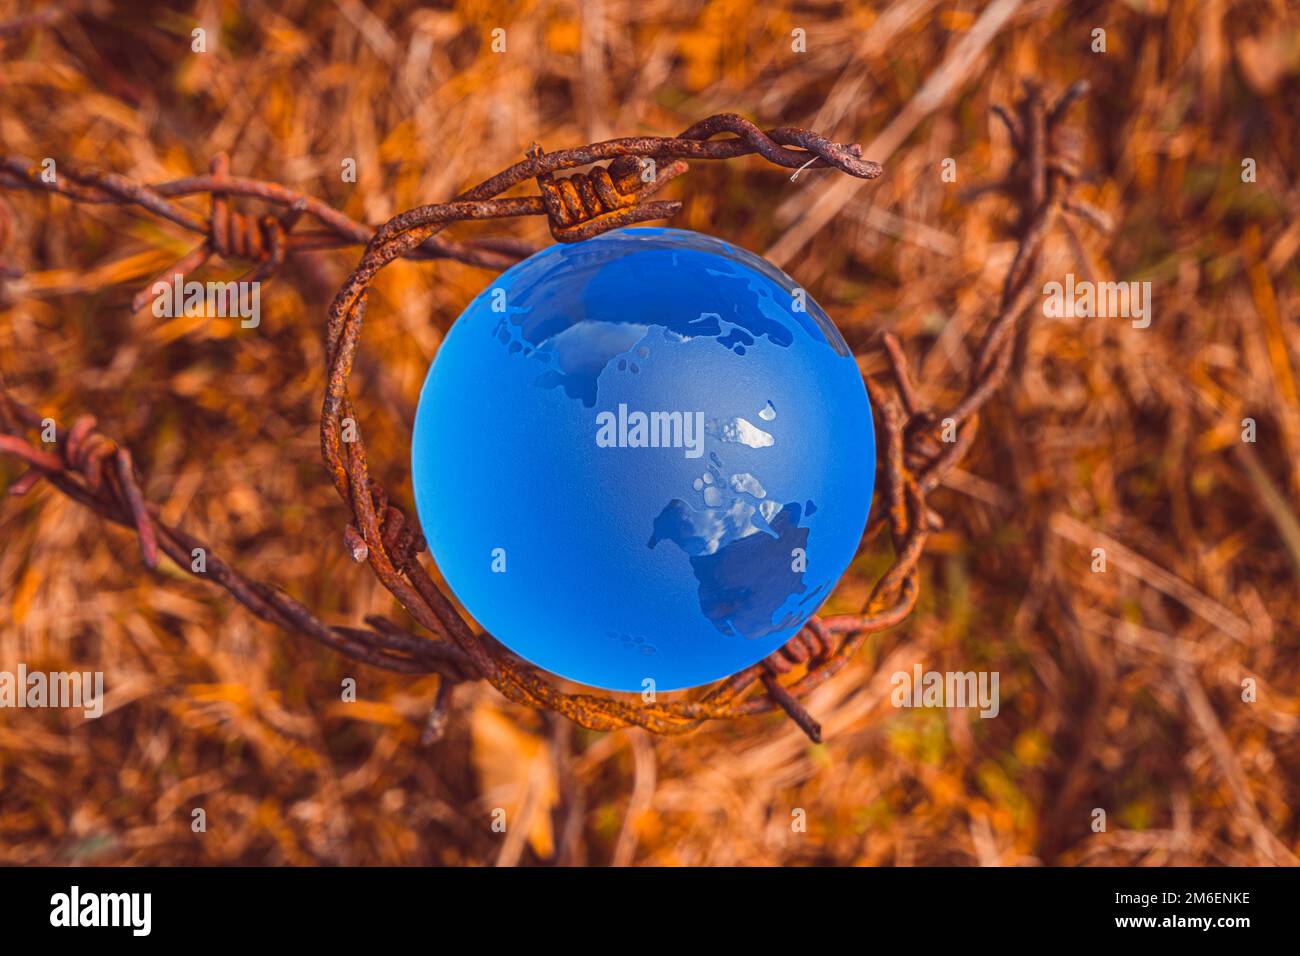 The concept of symbolism. On a yelloe grass is a glass globe, which is surrounded by rusty barbed wire Stock Photo